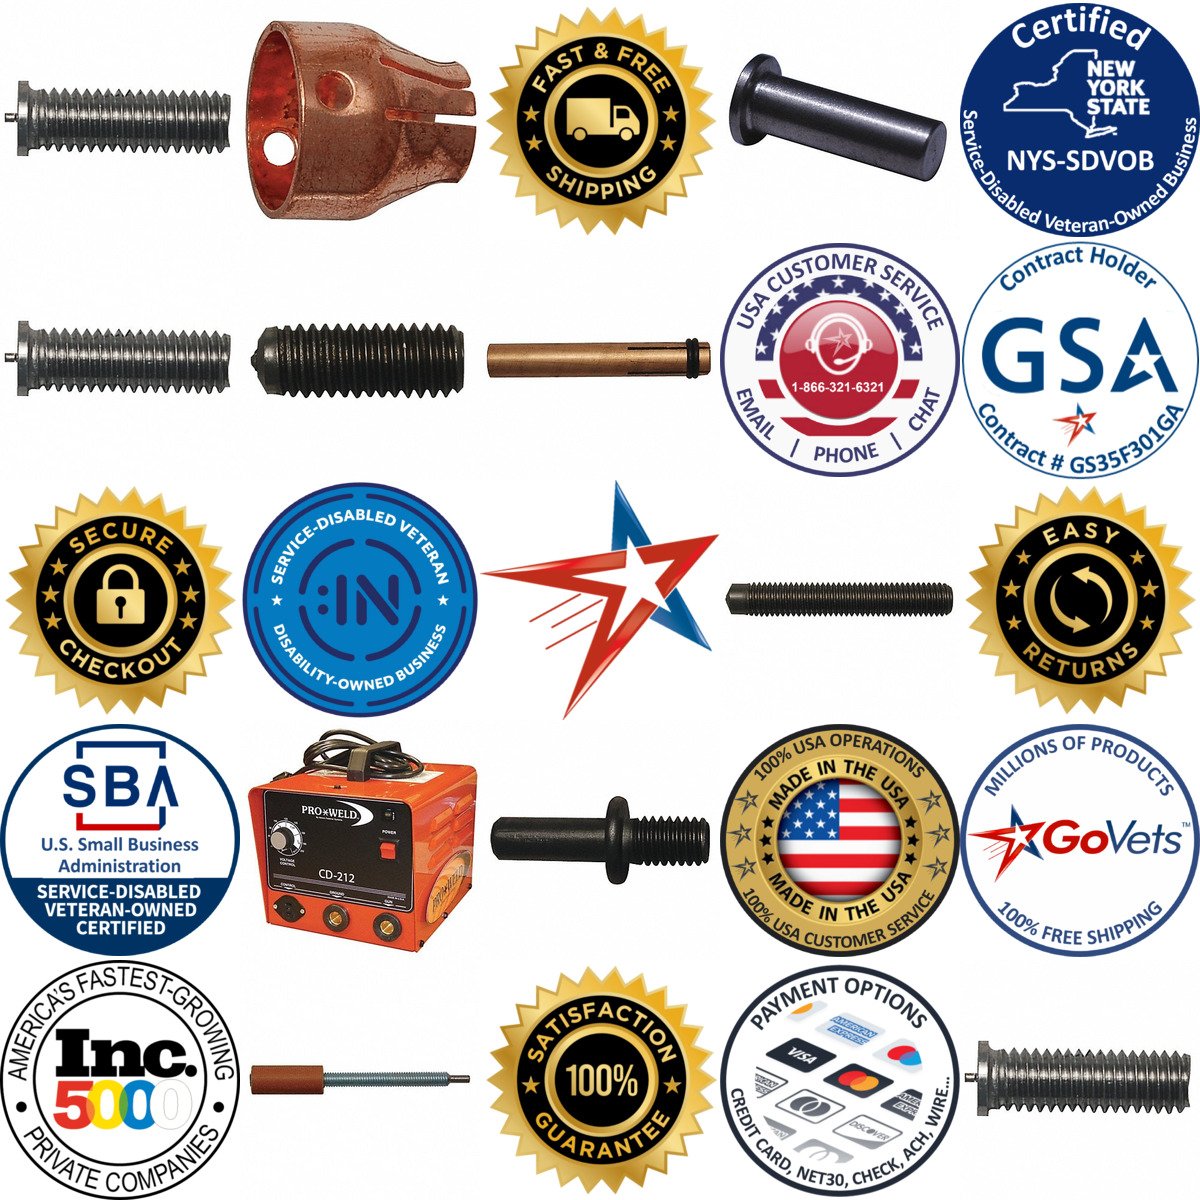 A selection of Stud Welding and Accessories products on GoVets